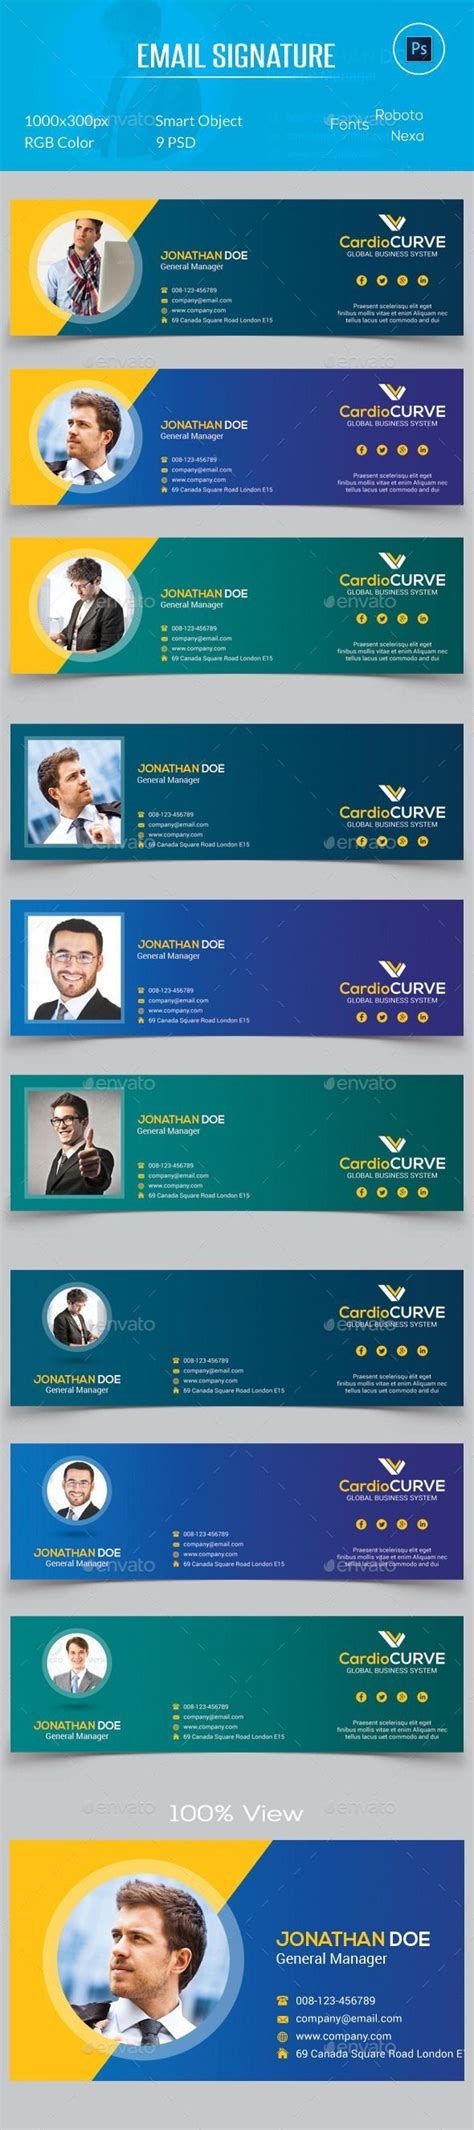 33 Lovely Email Signature Banner Ideas Email Signatures Email